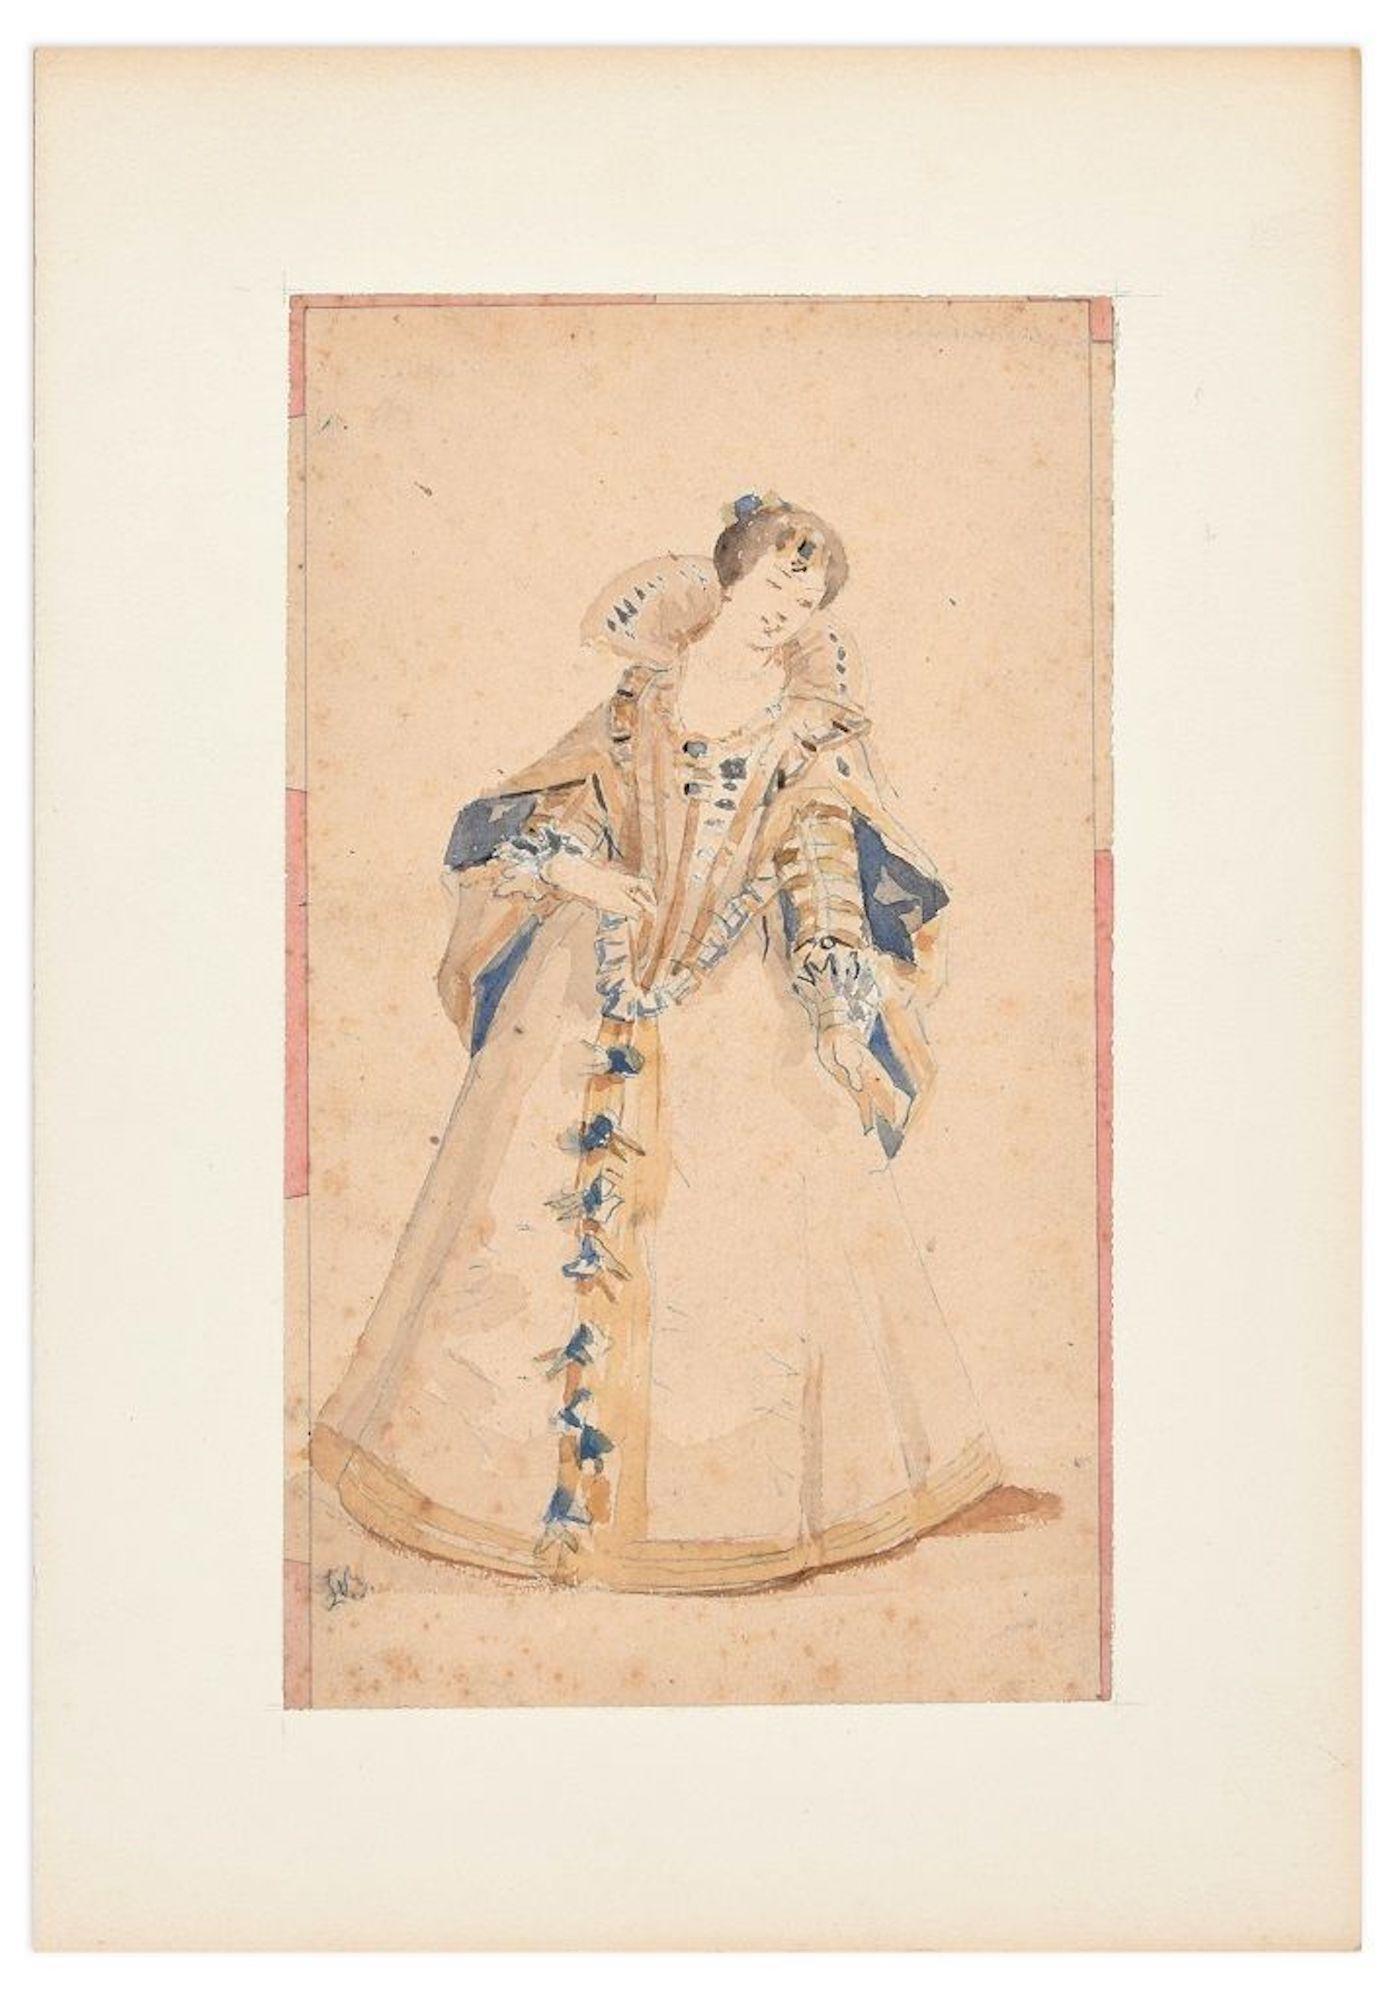 La Belle Dame - Pencil and Watercolor by Unknown French Artist 19th Century 